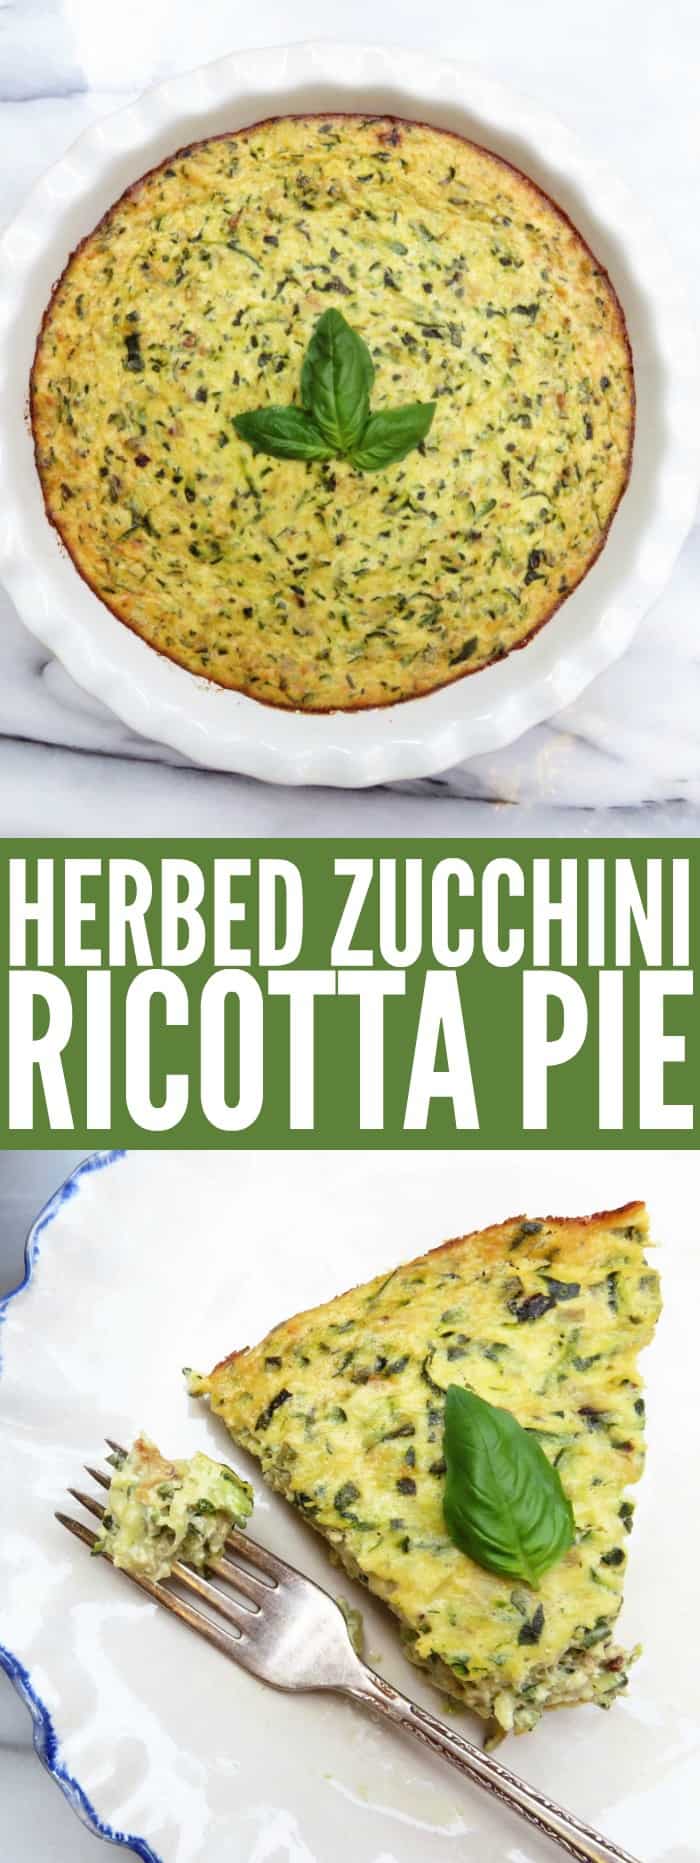 Herbed Zucchini + Ricotta Pie - The Toasted Pine Nut